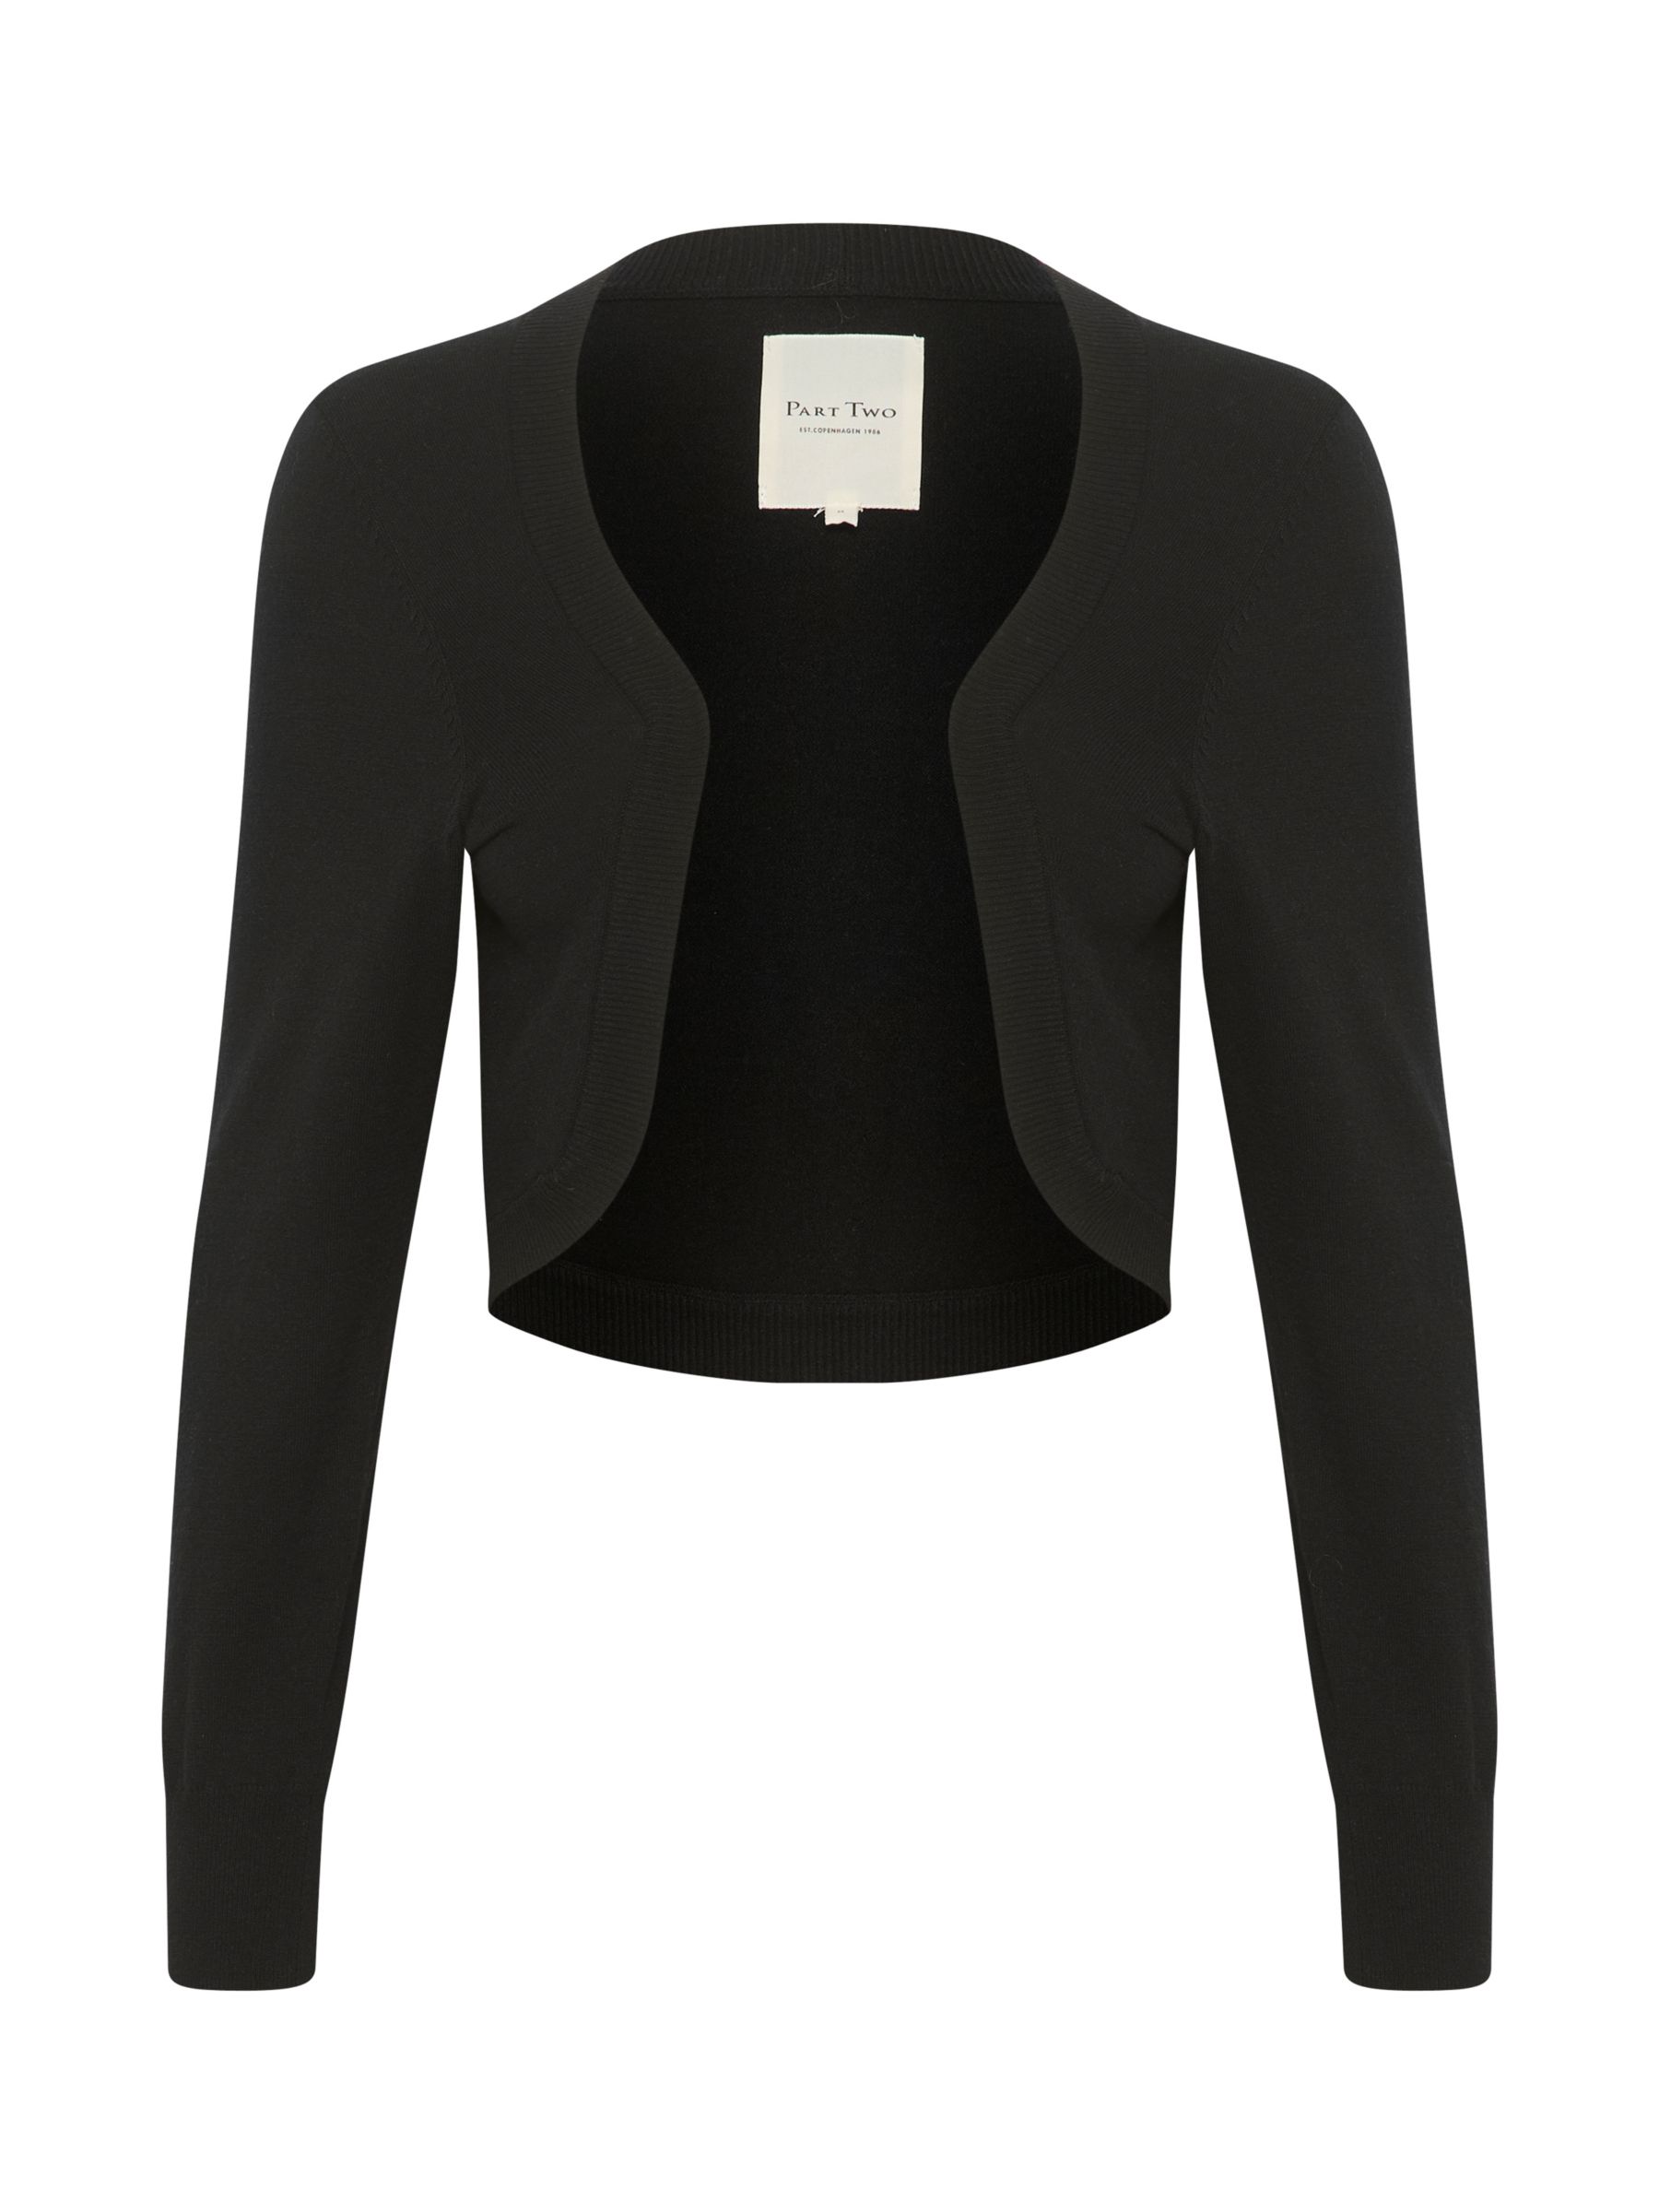 Buy Part Two Cellines Long Sleeve Cropped Cardigan Online at johnlewis.com